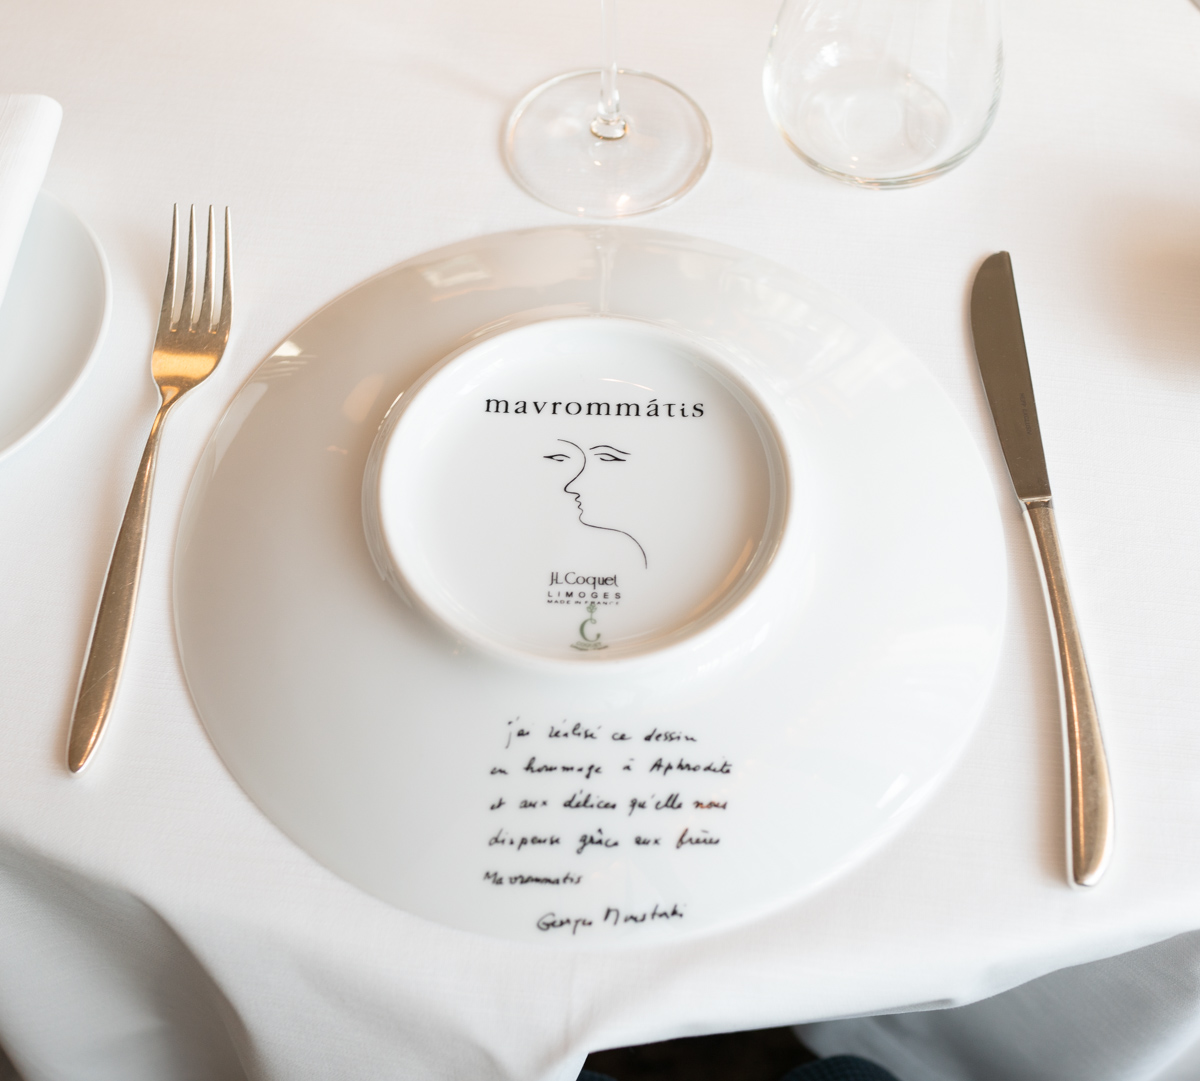 Signature Menu is 7 Courses, designed to celebrate the finest Hellenic cuisine for 145 €. There is also a 5 Courses tribute to Greek terroirs for 105 €. Wine pairing is 80 or 55, respectively.